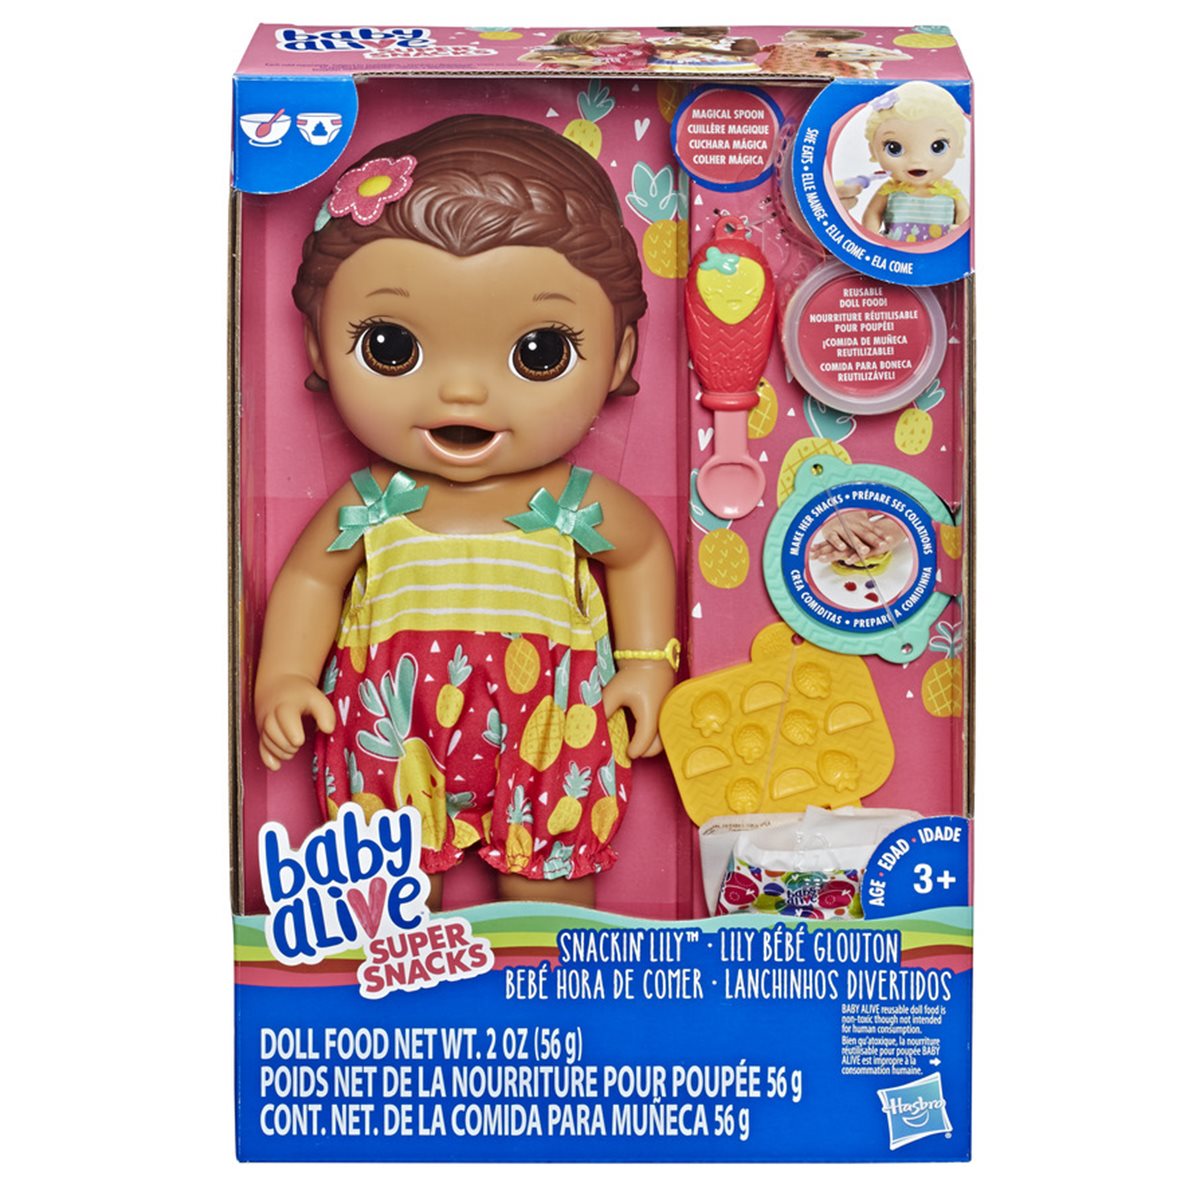 Baby Alive Super Snacks Snackin Luke Boy Doll Blonde Hair /& Blue Outfit NEW